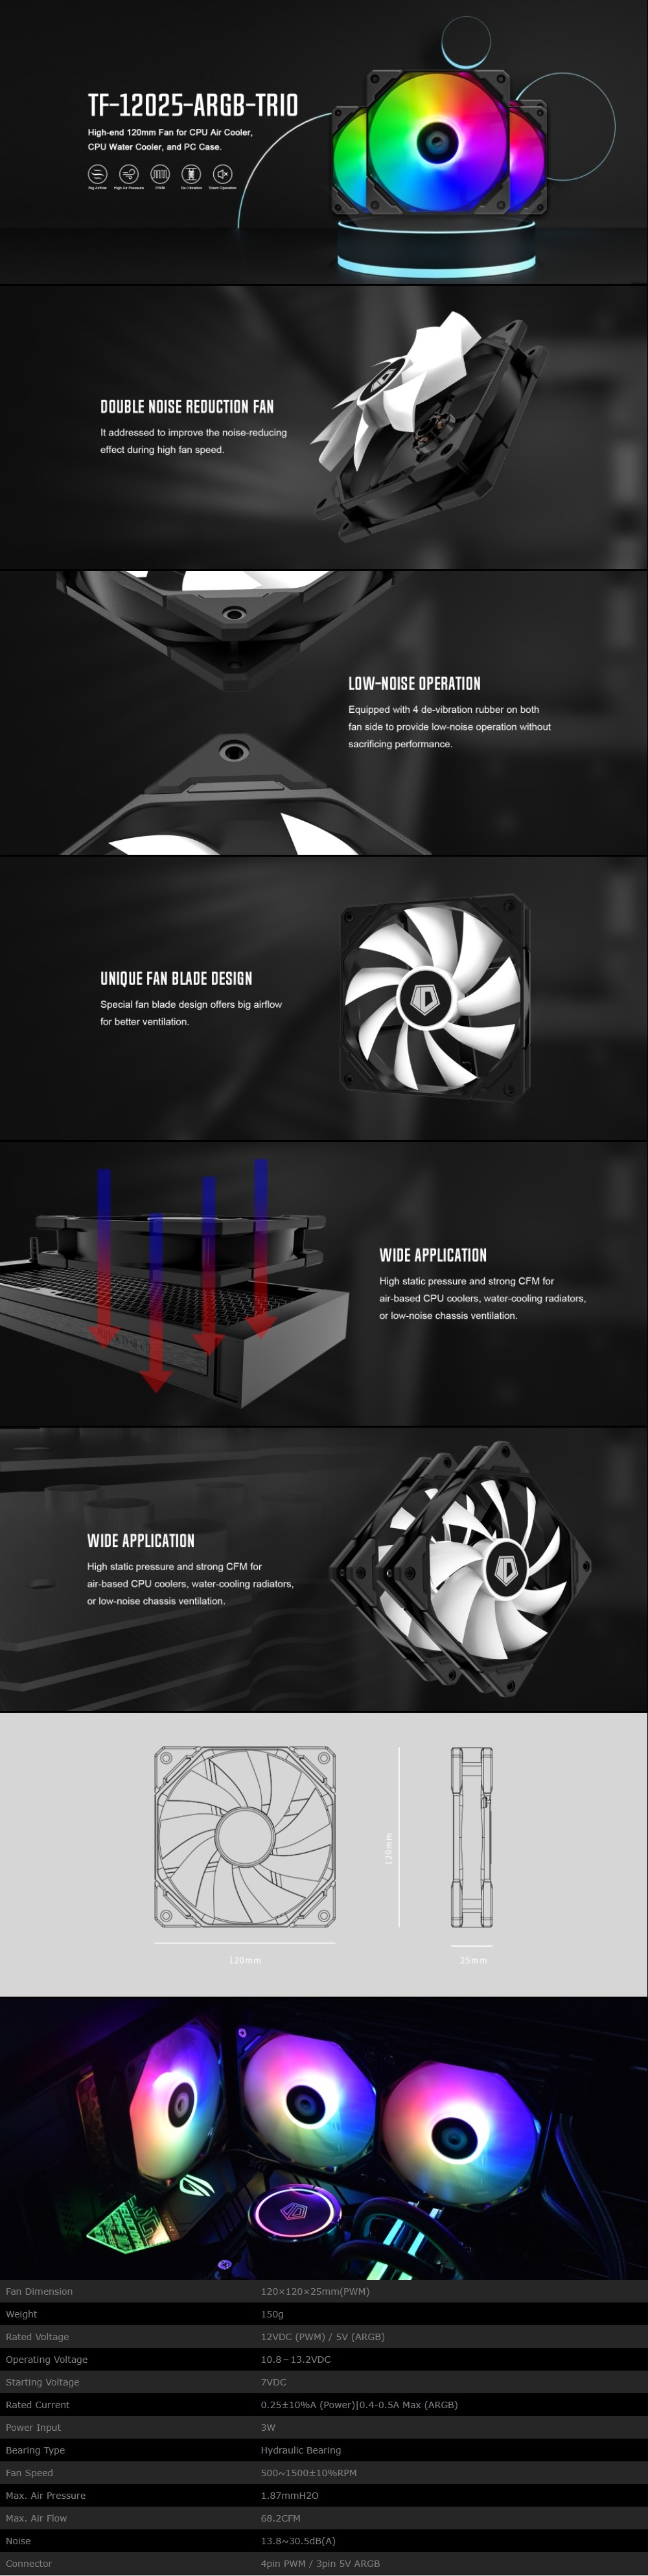 A large marketing image providing additional information about the product ID-COOLING TF Series 120mm ARGB Case Fan 3 Pack - Black - Additional alt info not provided